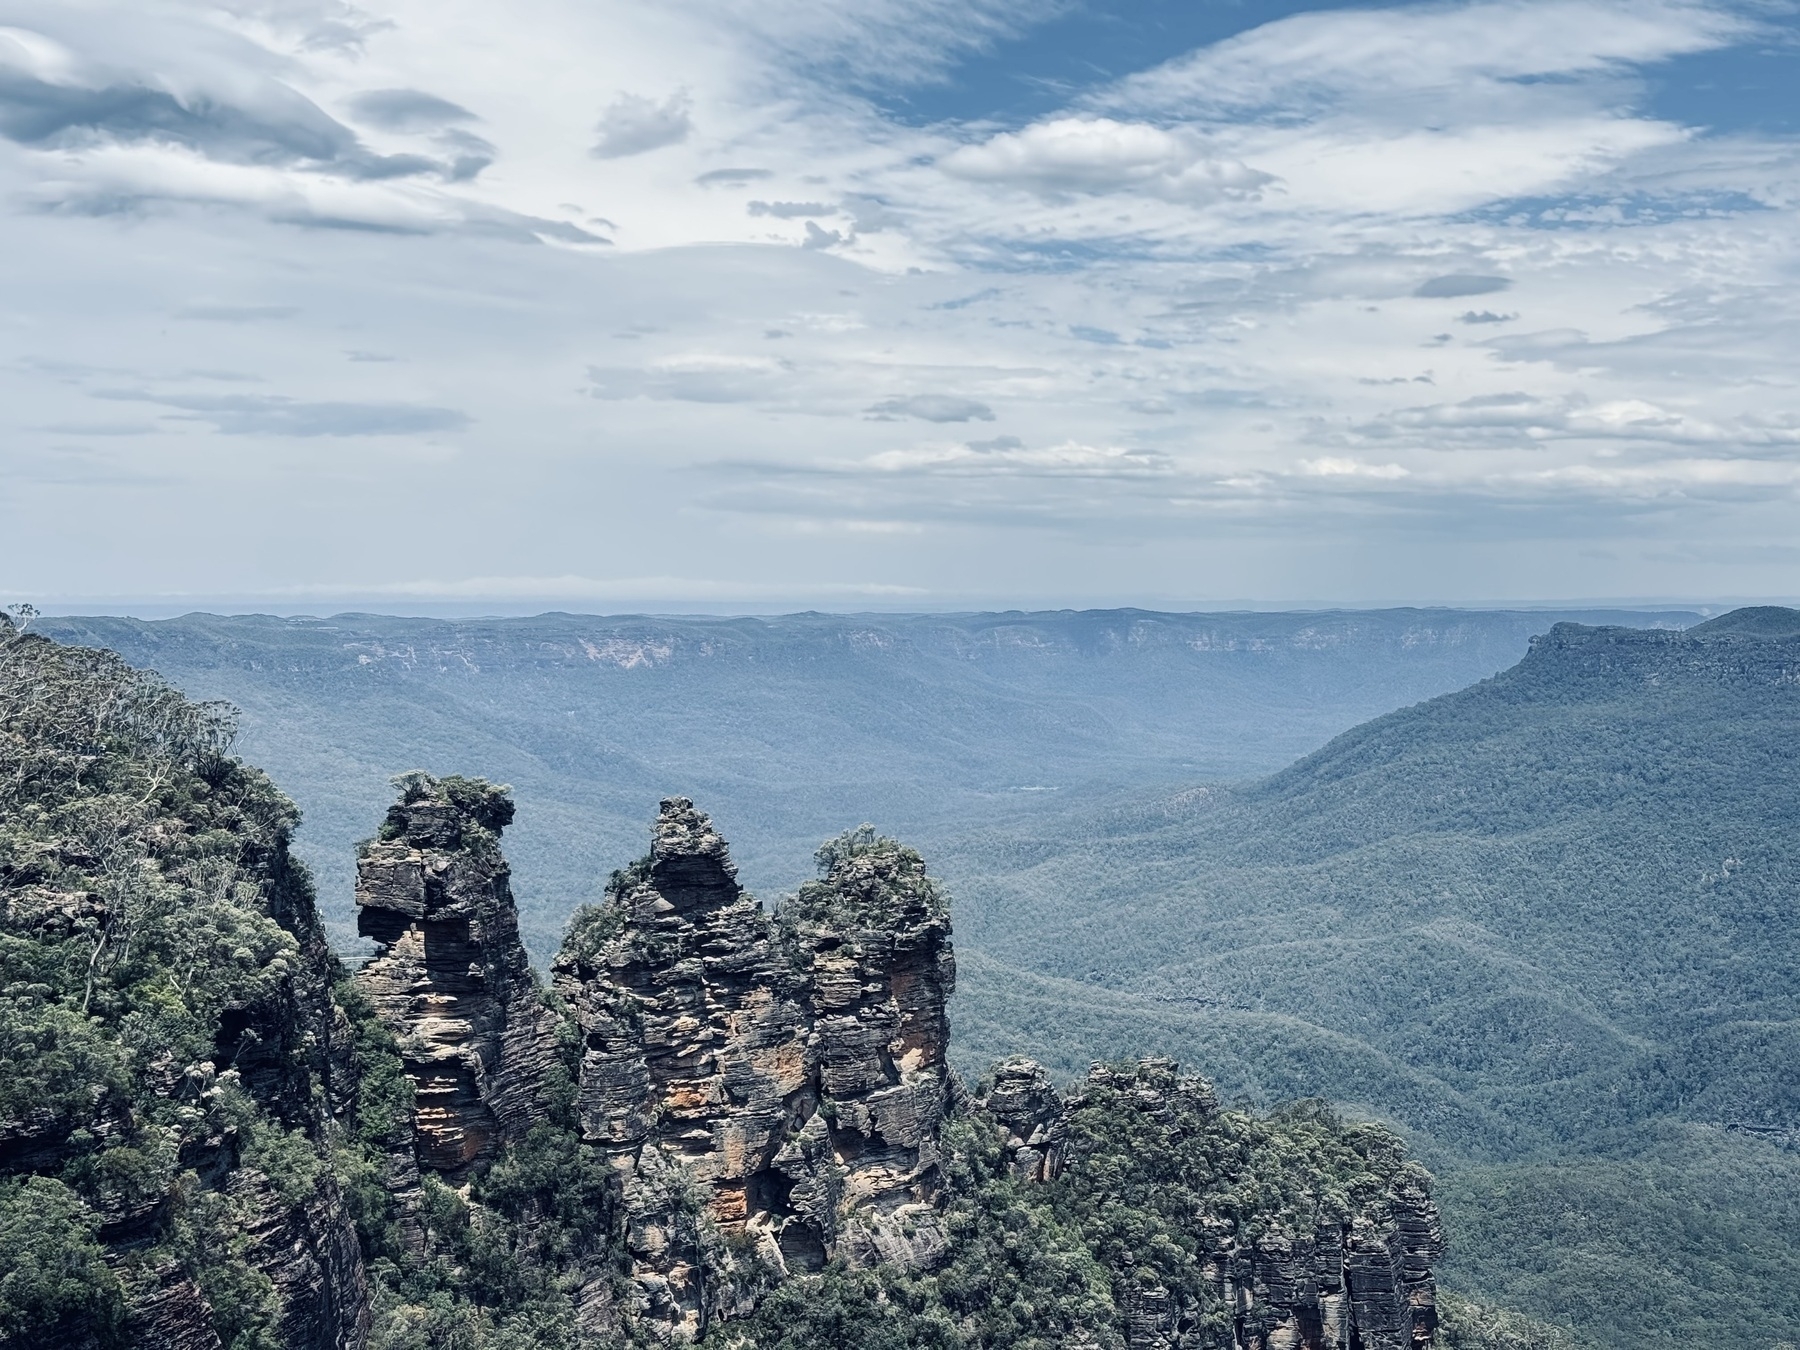 Rock formations in the foreground with valleys of the Blue Mountains in the background.